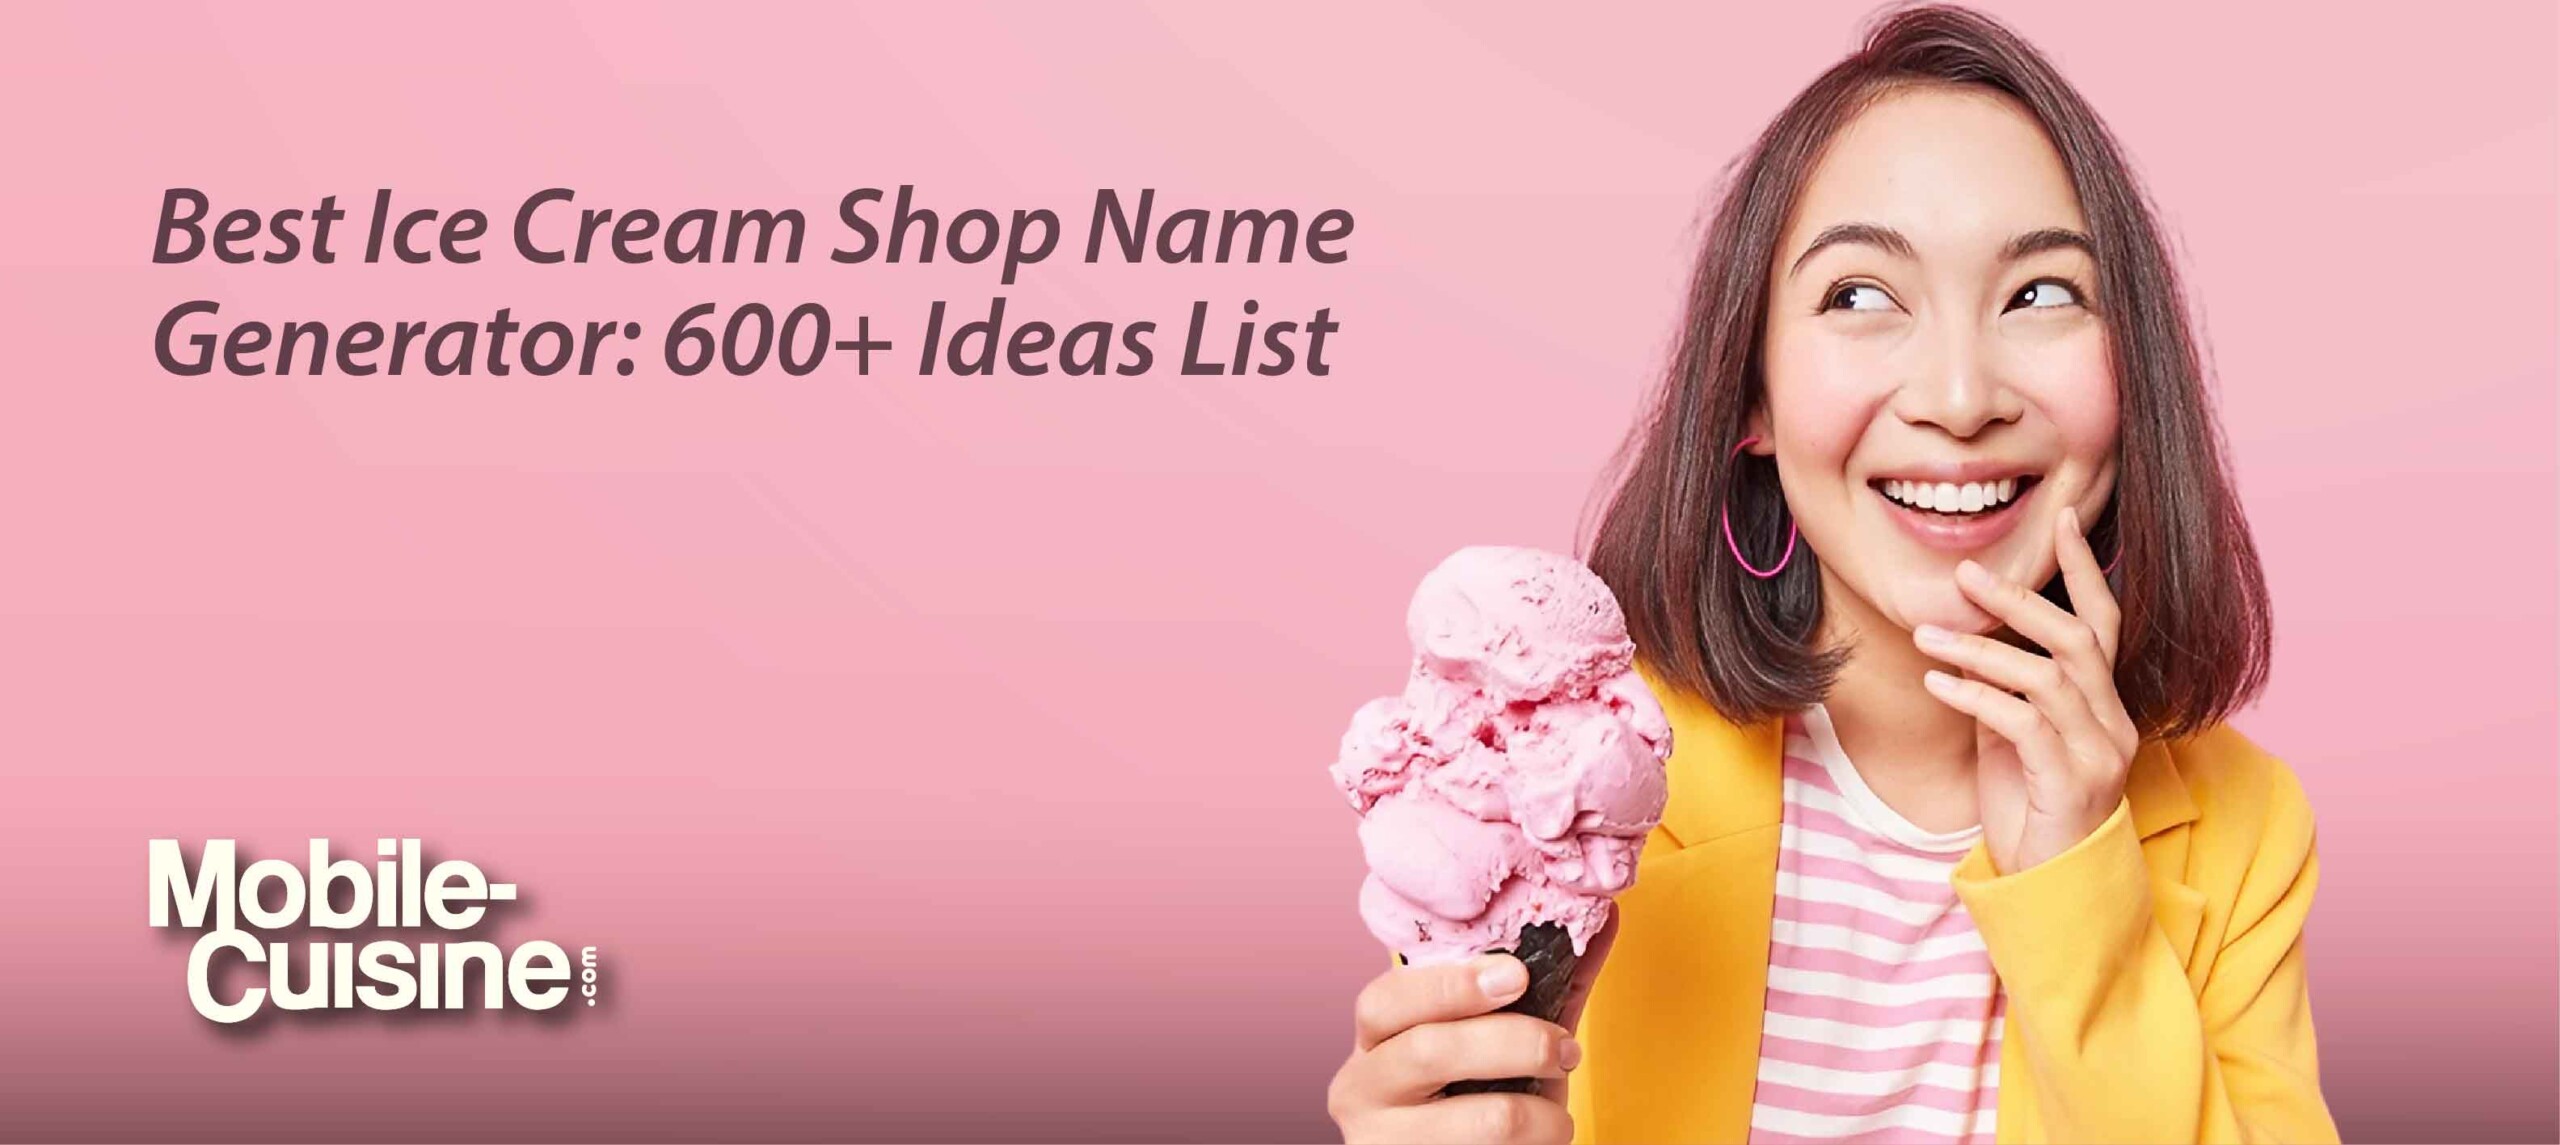  What's Your Ice Cream Name Game Sign with Name Tag